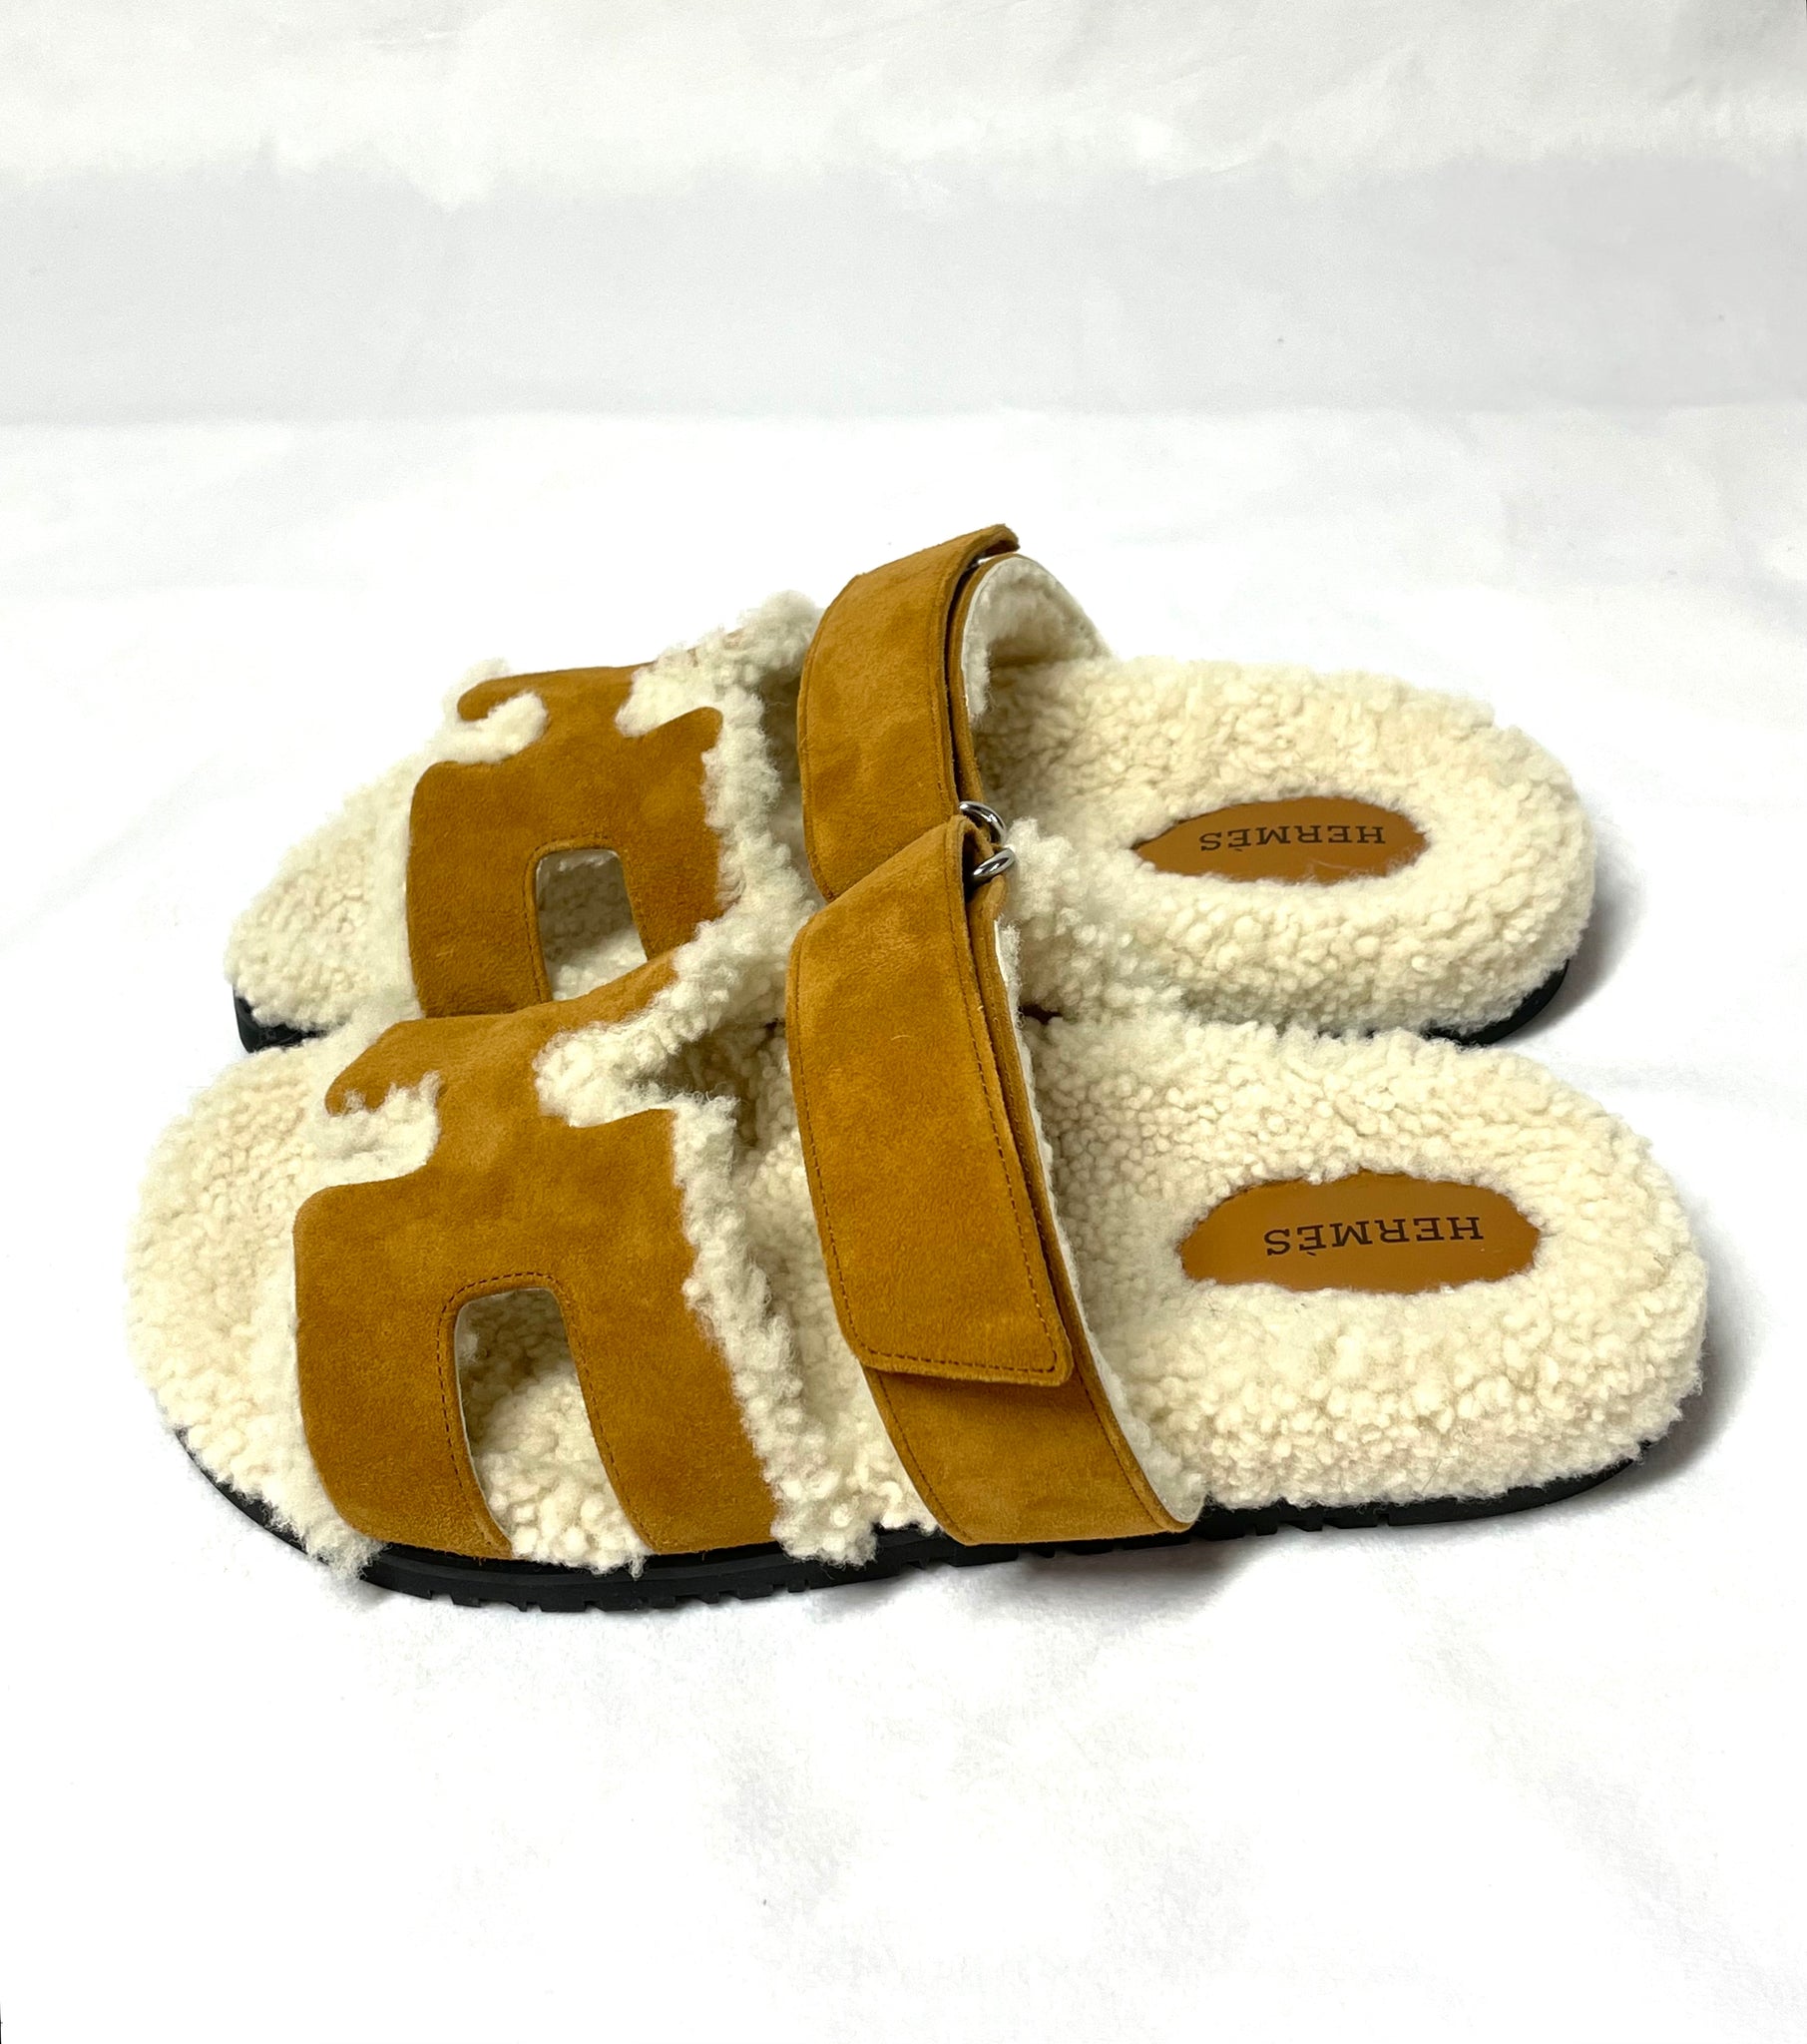 Pre Loved Hermes Chypre Sandals 37 available at UniKoncept in Waterloo